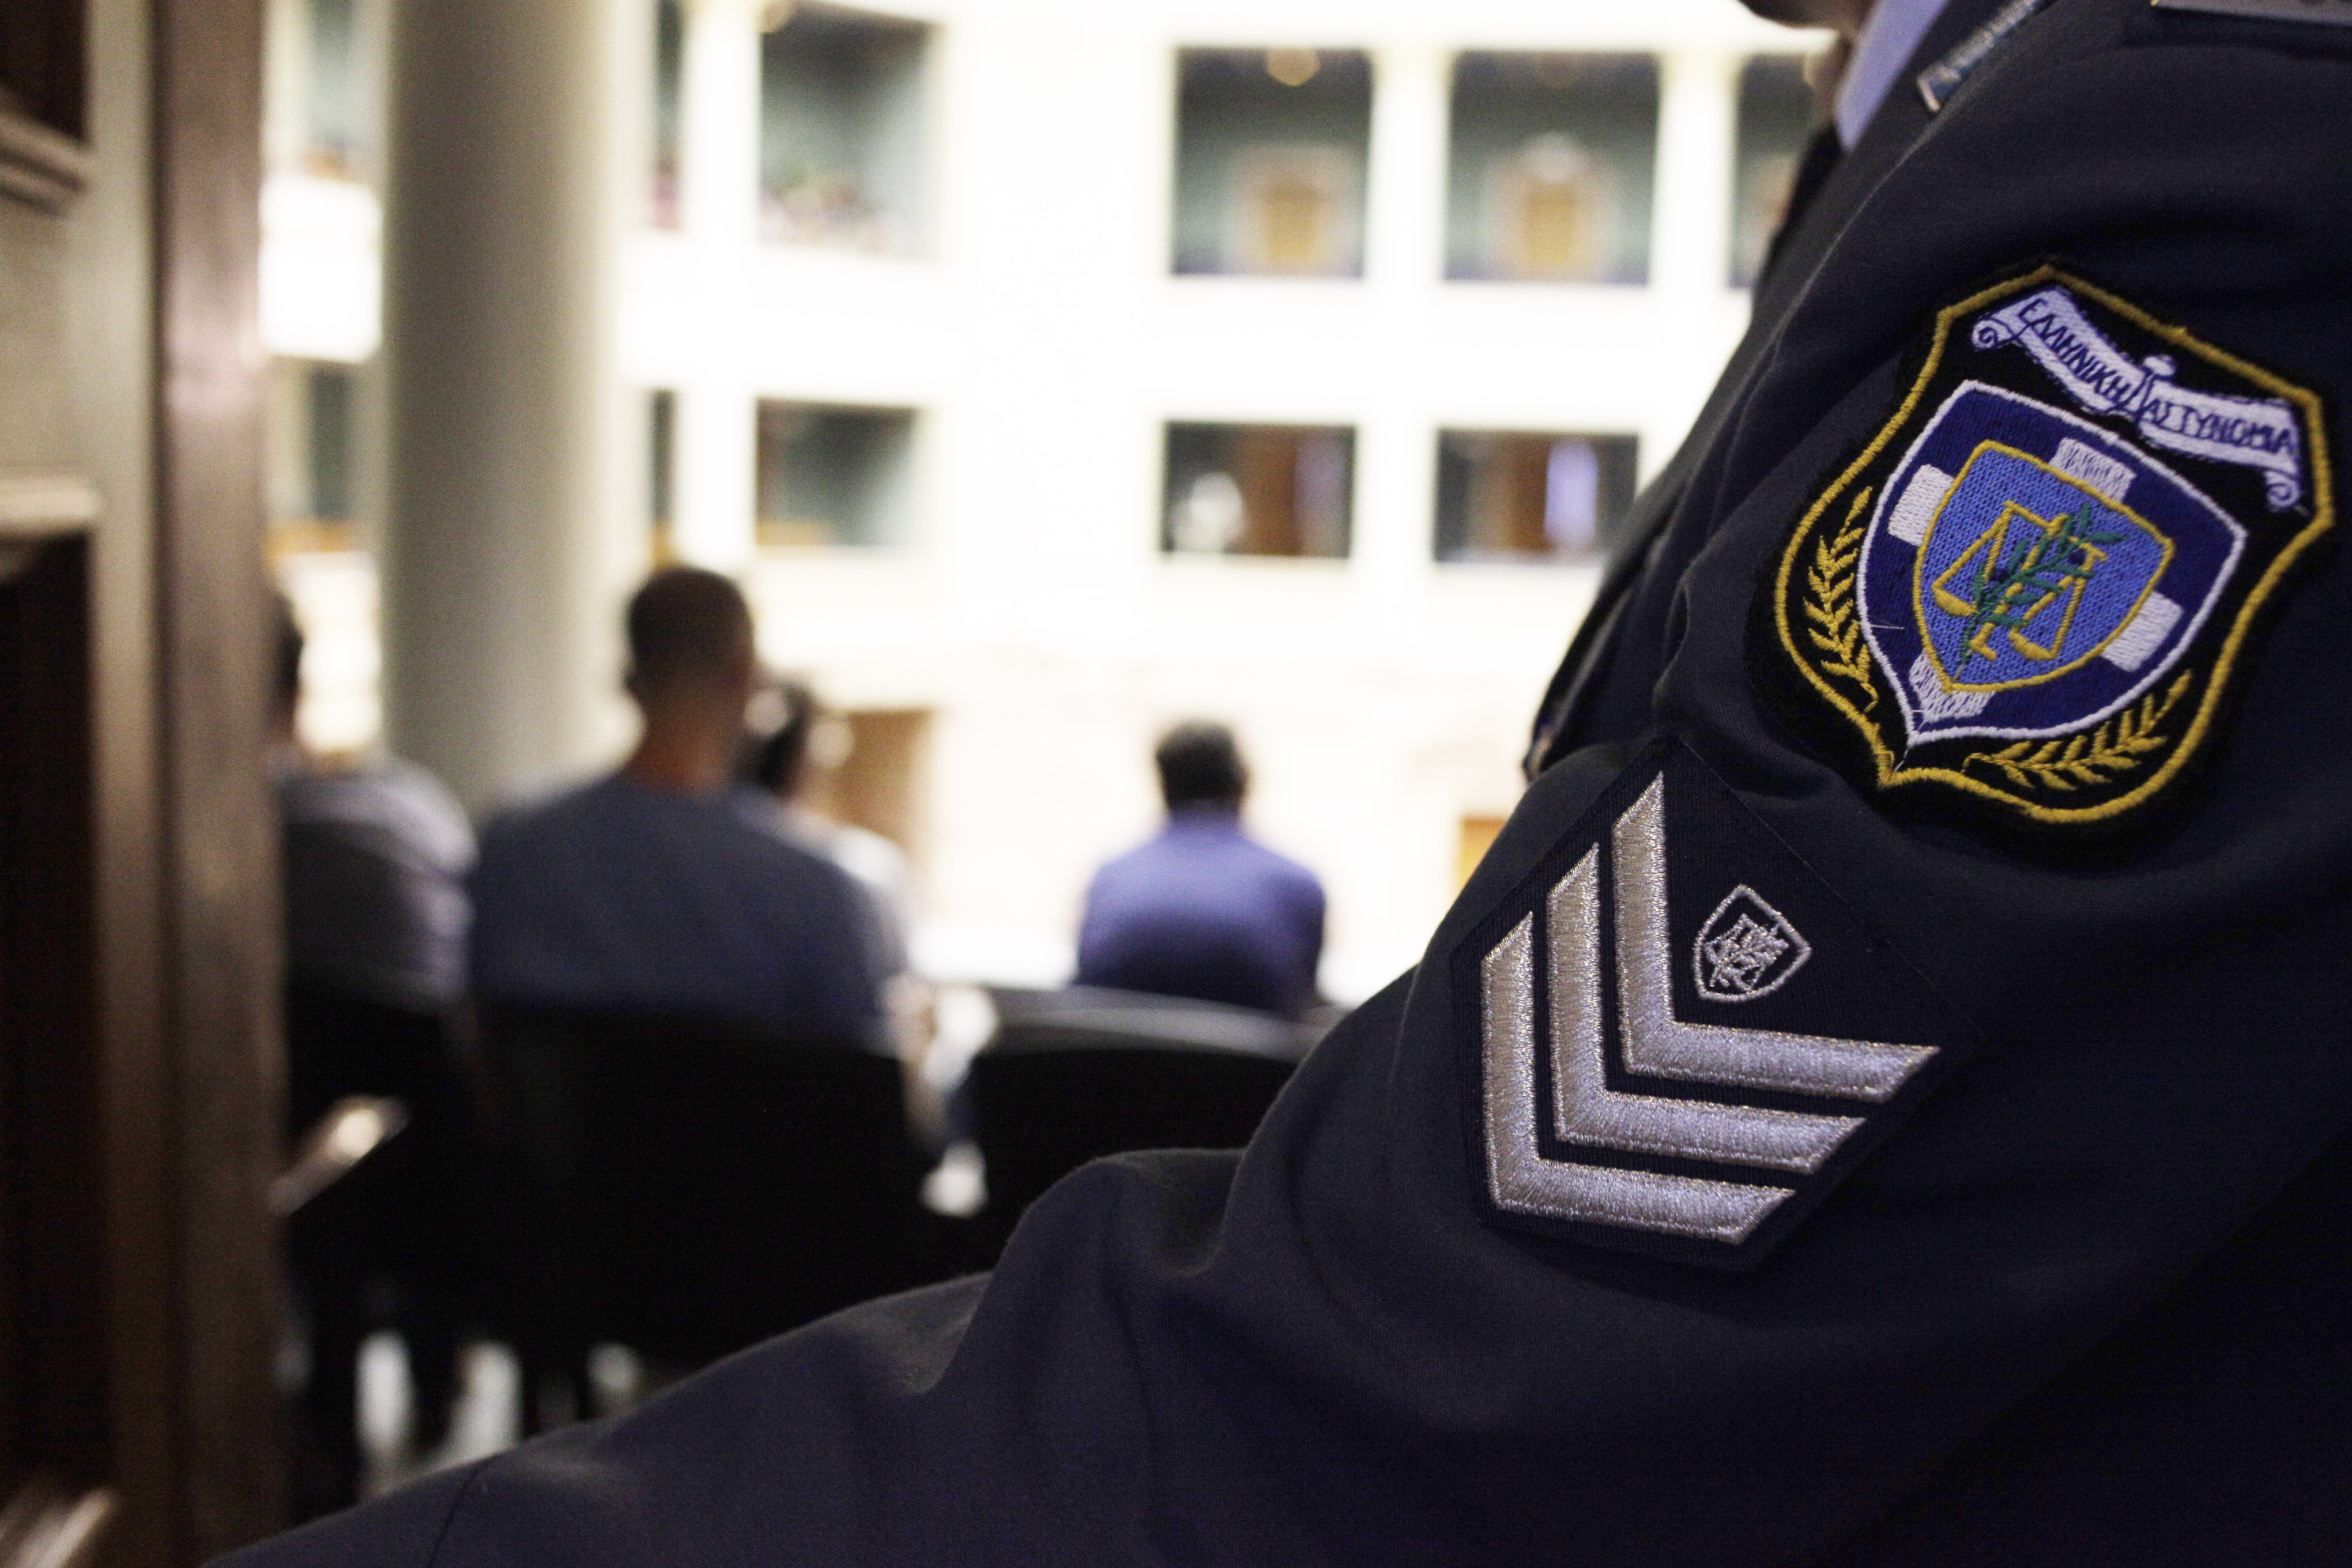 Police union demonstrates over pension system reform